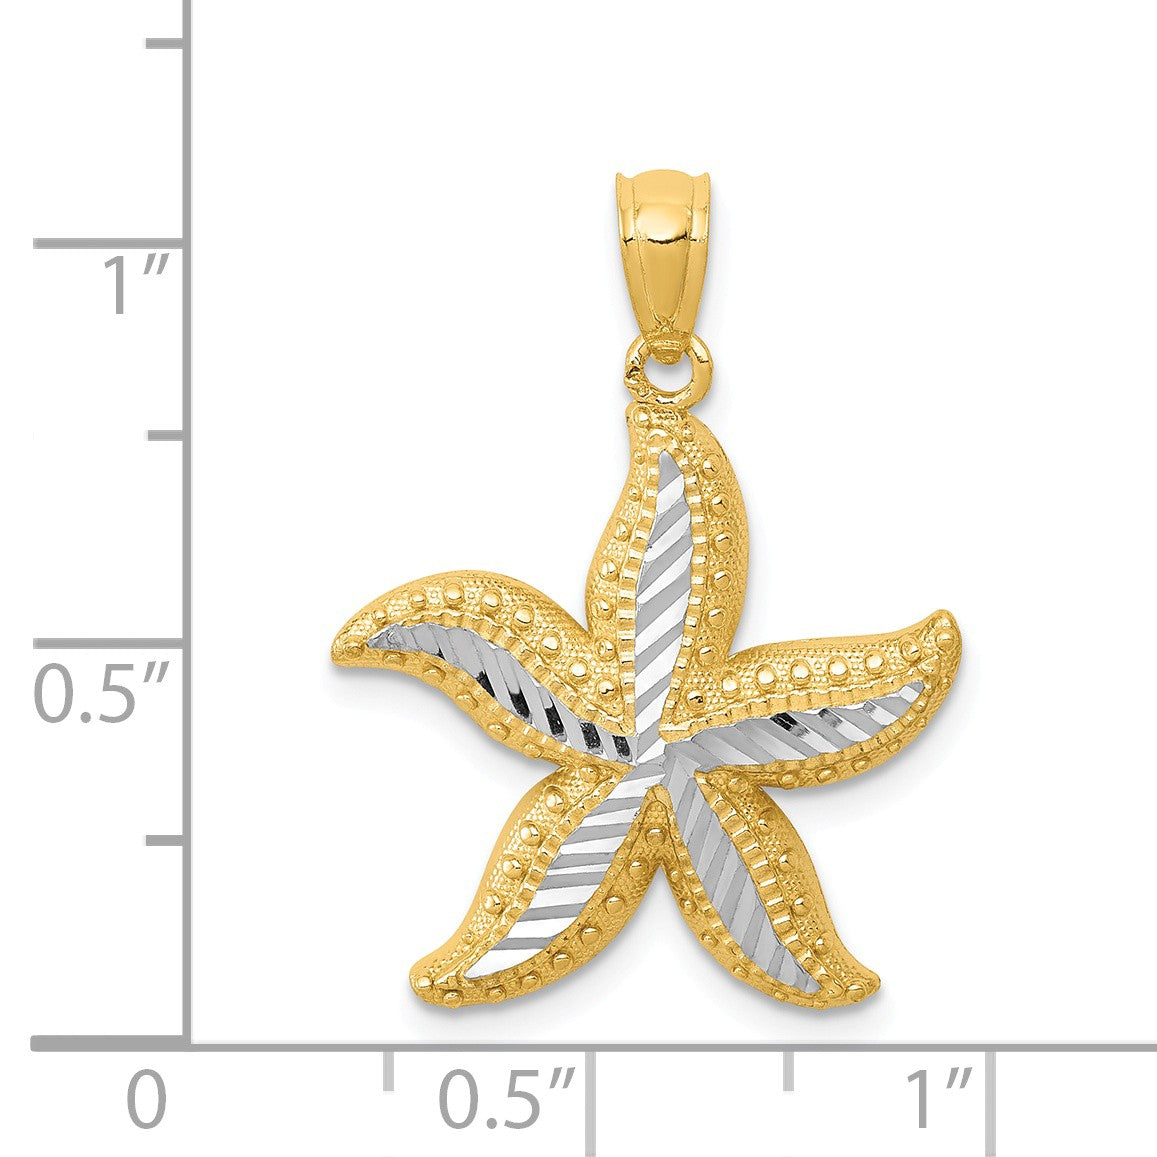 Alternate view of the 14k Yellow Gold and White Rhodium Starfish Pendant, 12mm or 19mm by The Black Bow Jewelry Co.